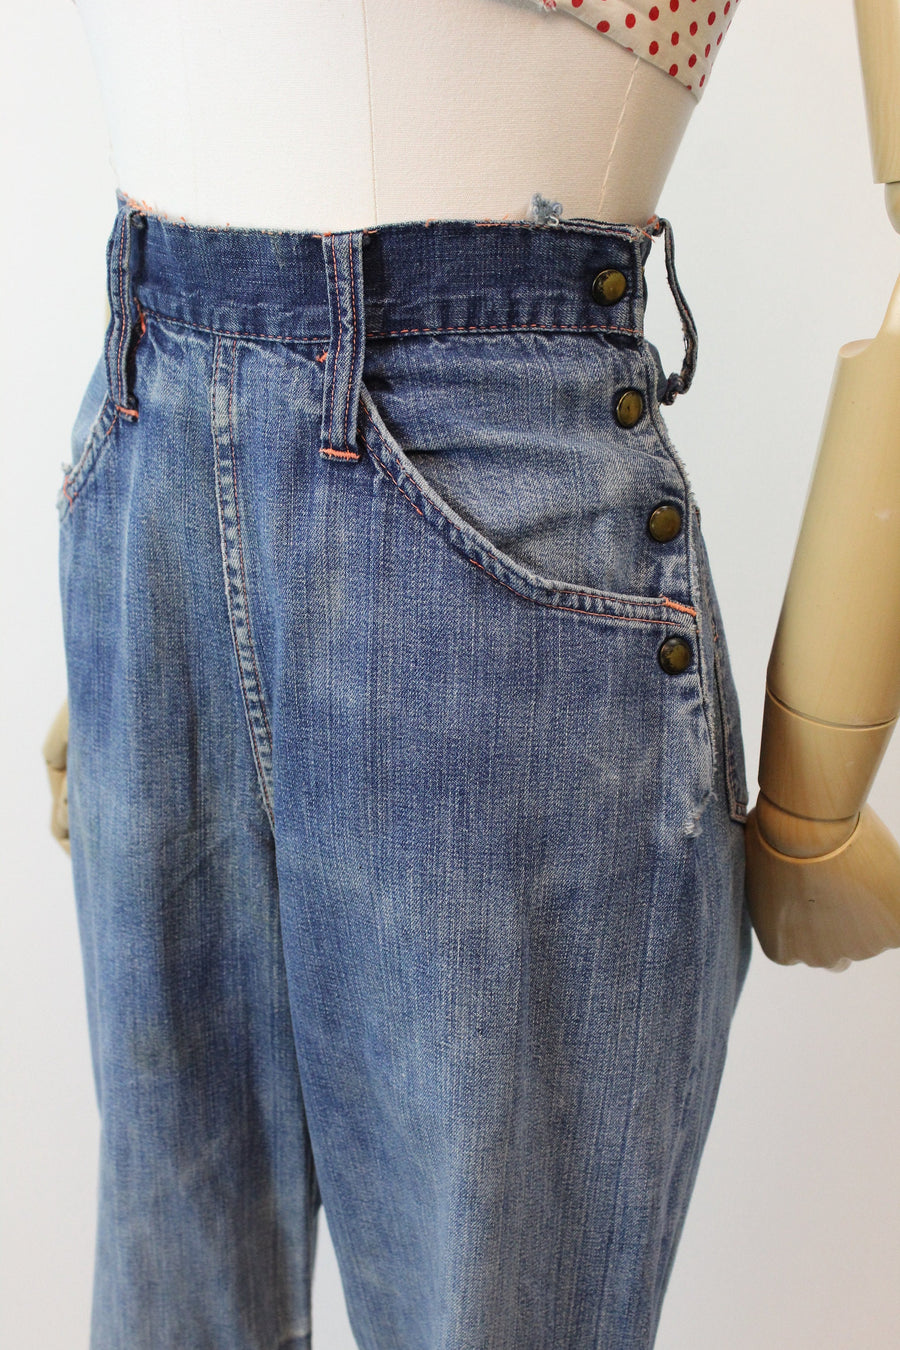 1940s SIDE SNAP jeans DENIM workwear xs | new spring summer